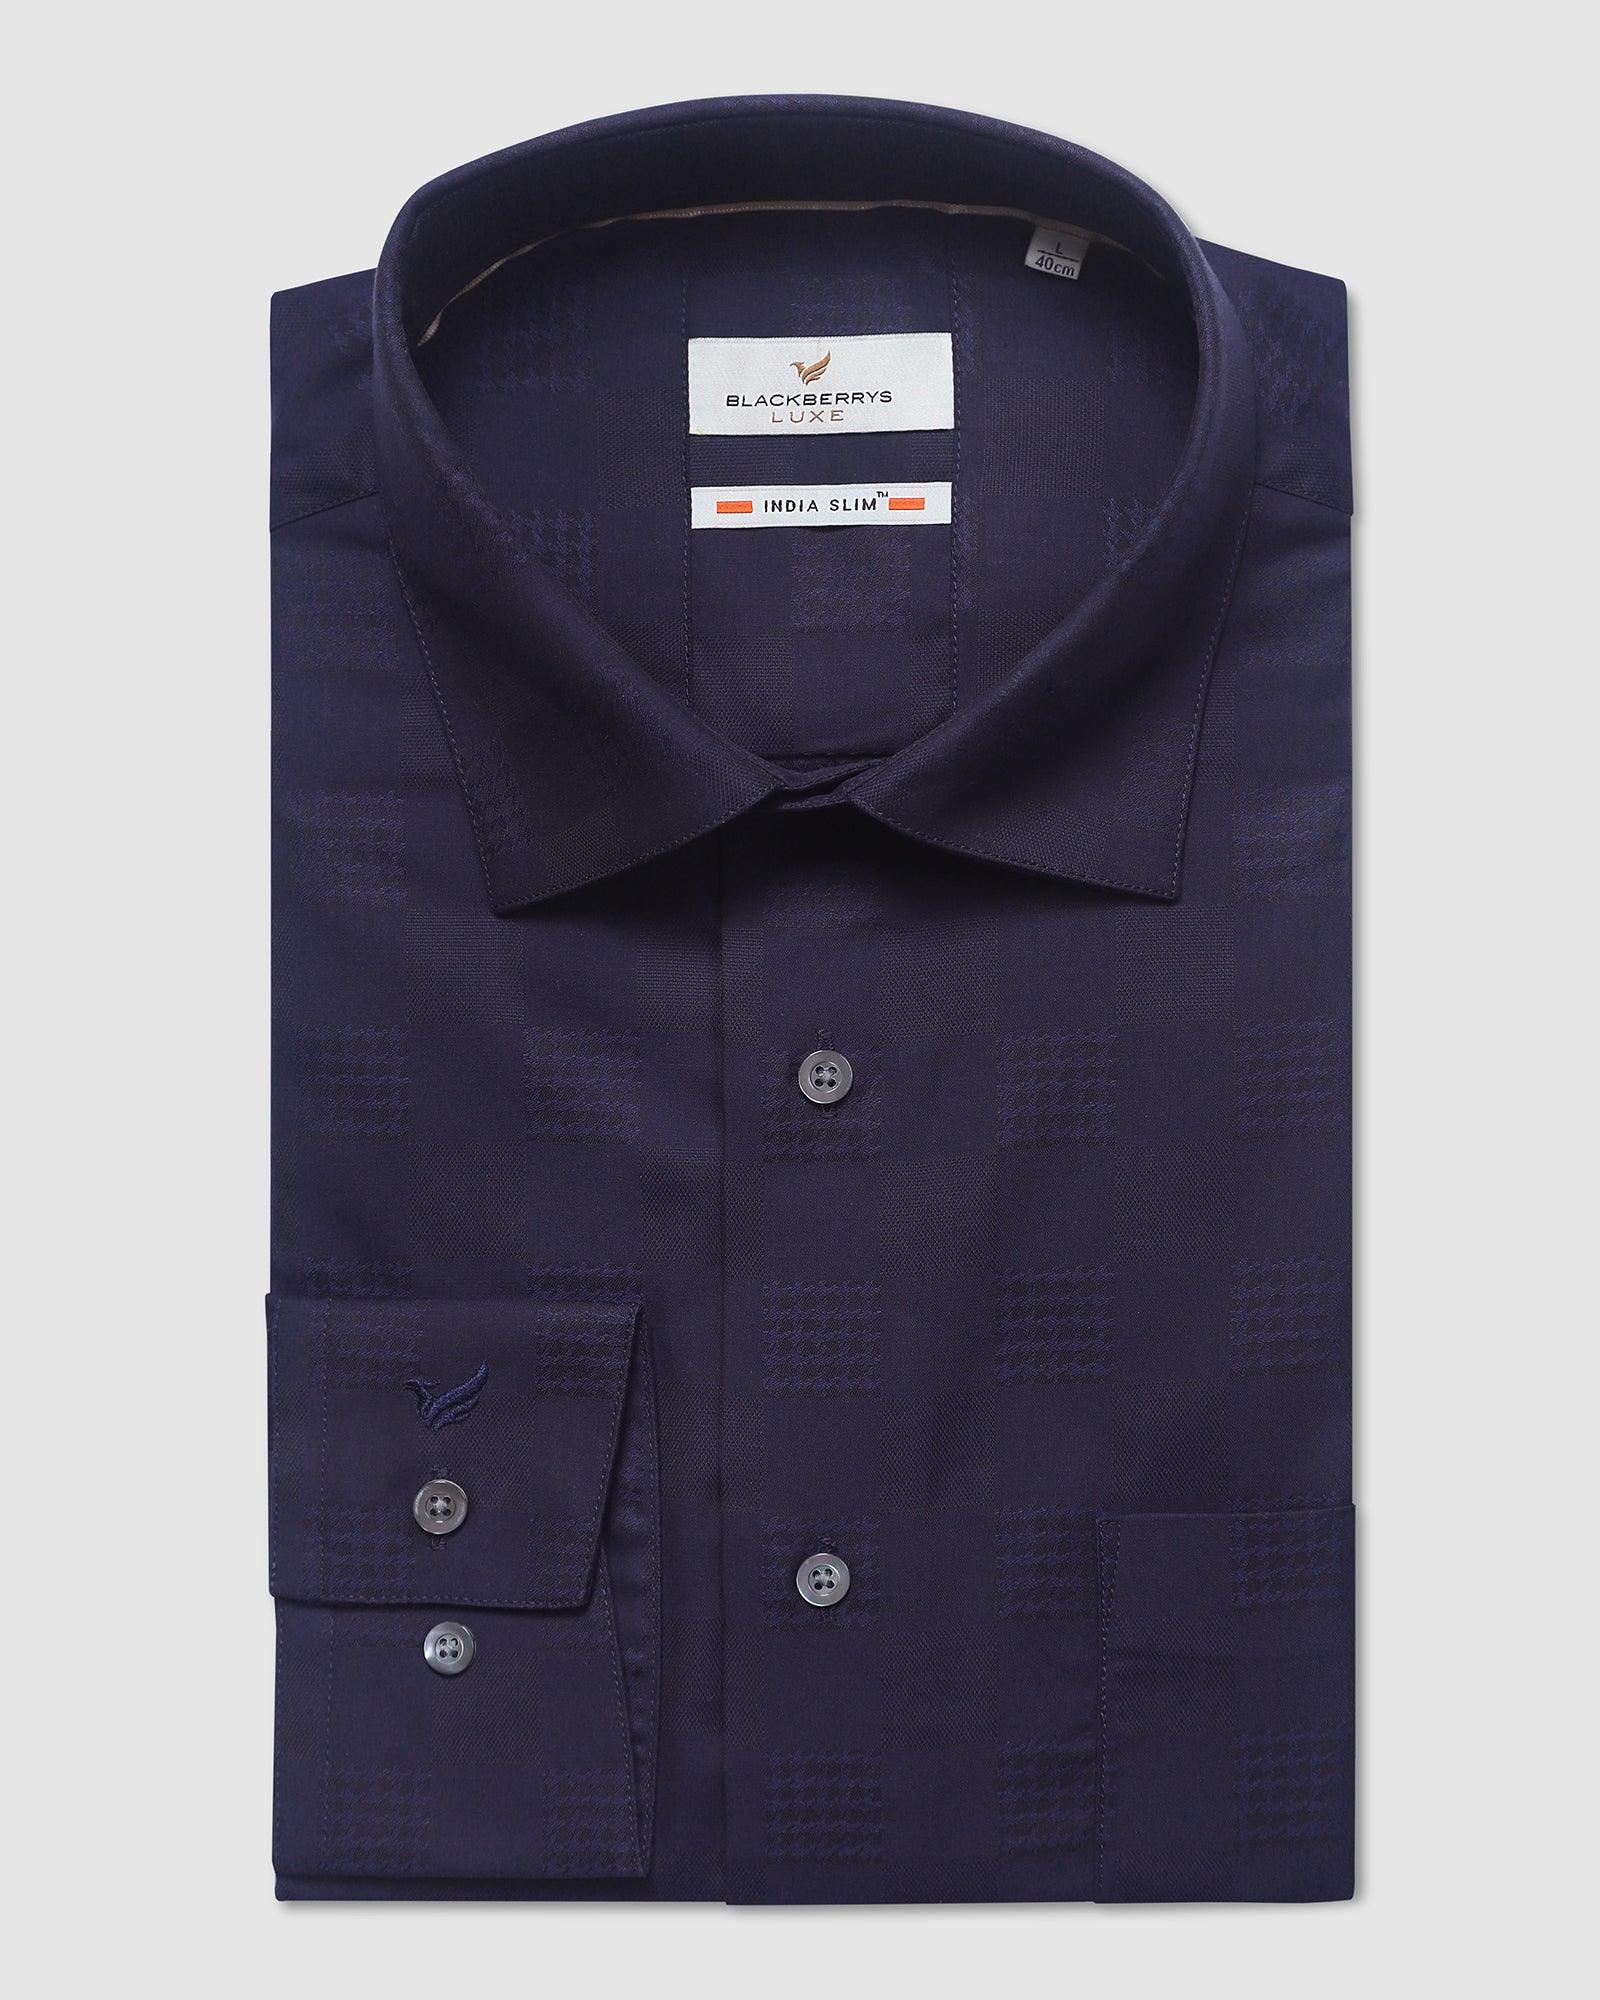 Buy Dior Mens Shirt Online In India -  India